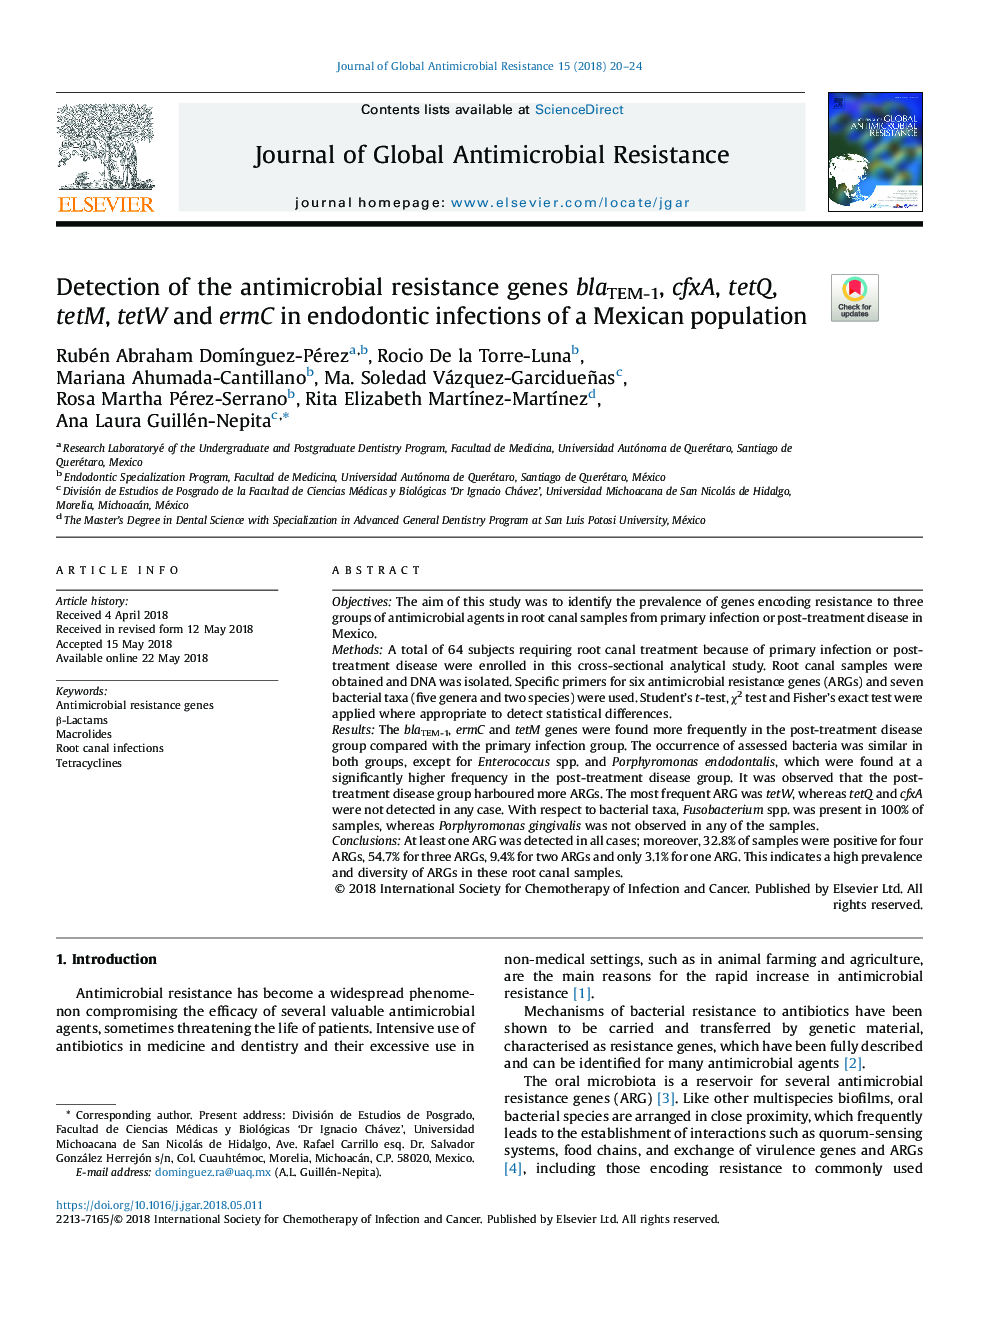 Detection of the antimicrobial resistance genes blaTEM-1, cfxA, tetQ, tetM, tetW and ermC in endodontic infections of a Mexican population